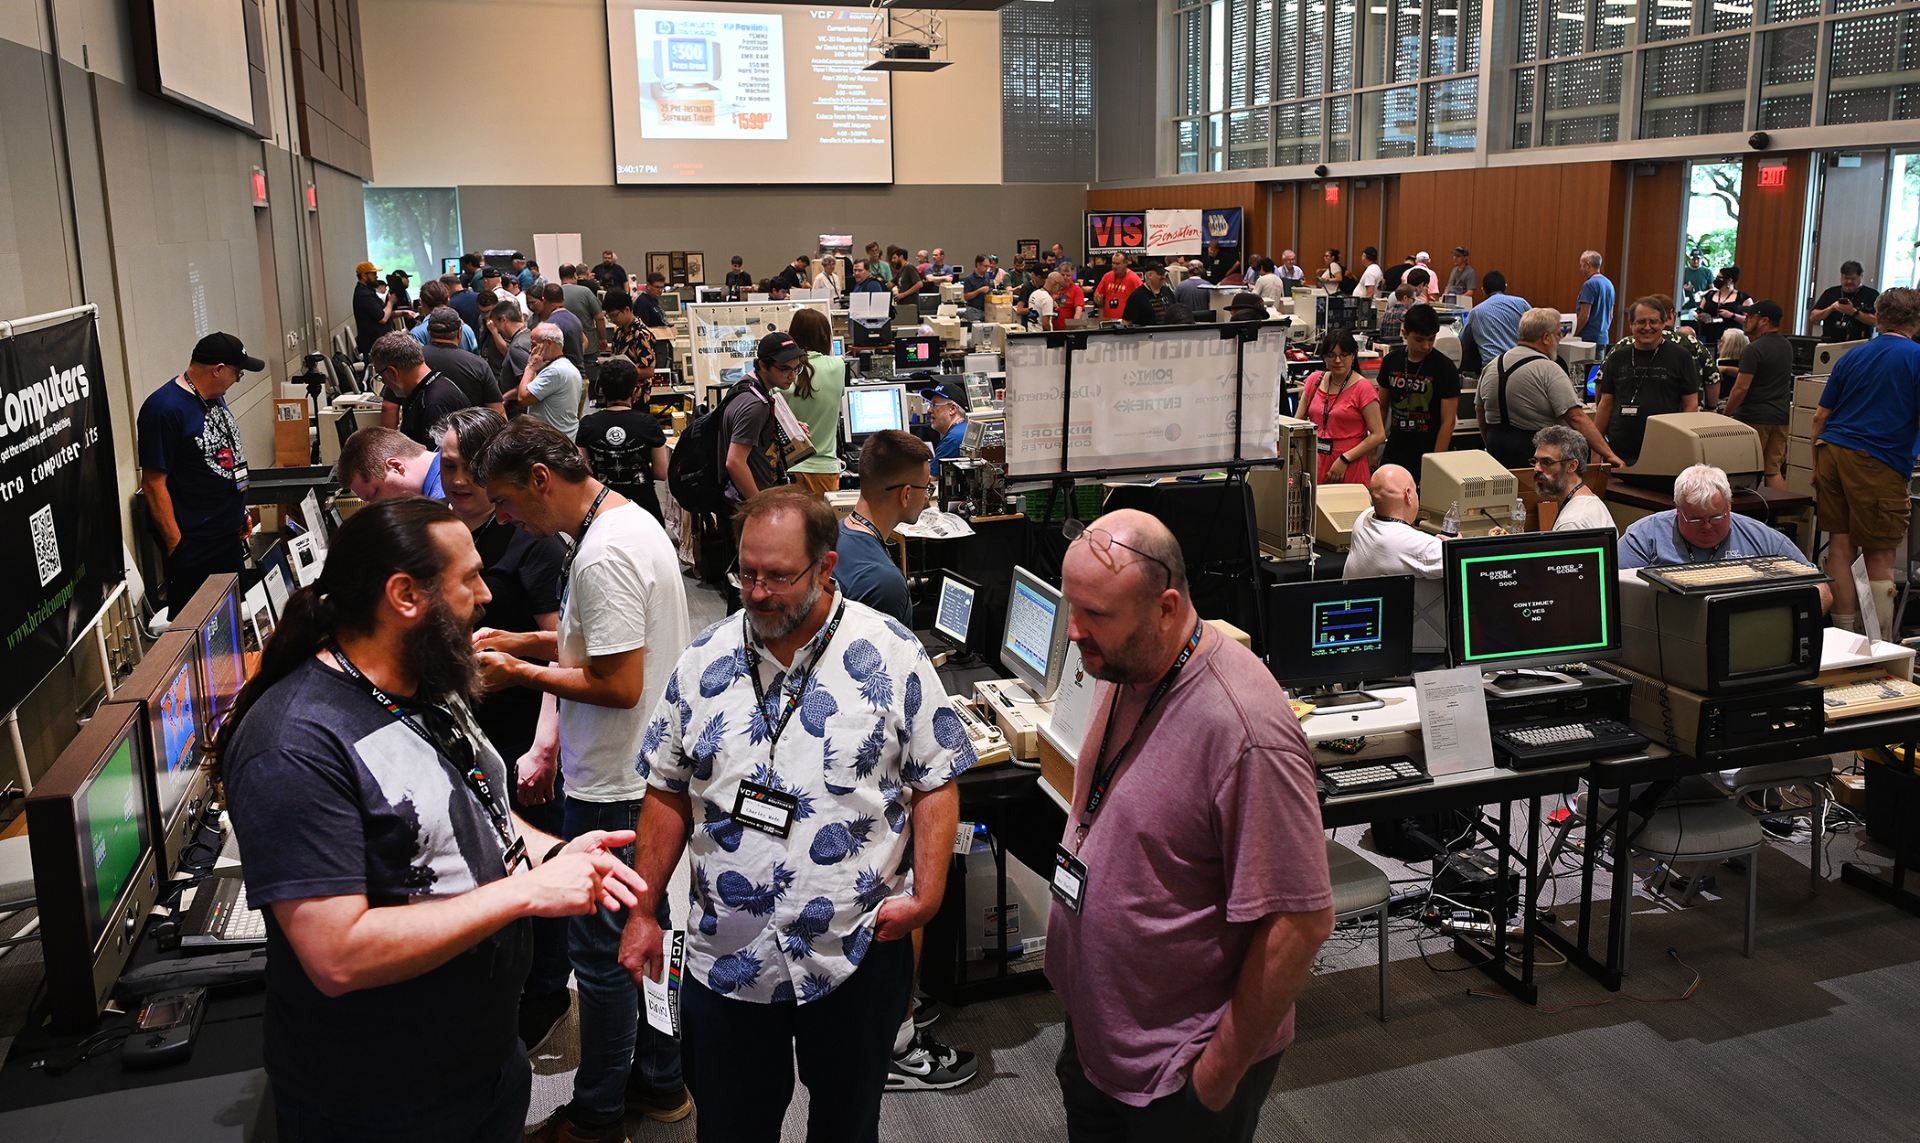 Large group of people gathered at a vintage computer exhibit.